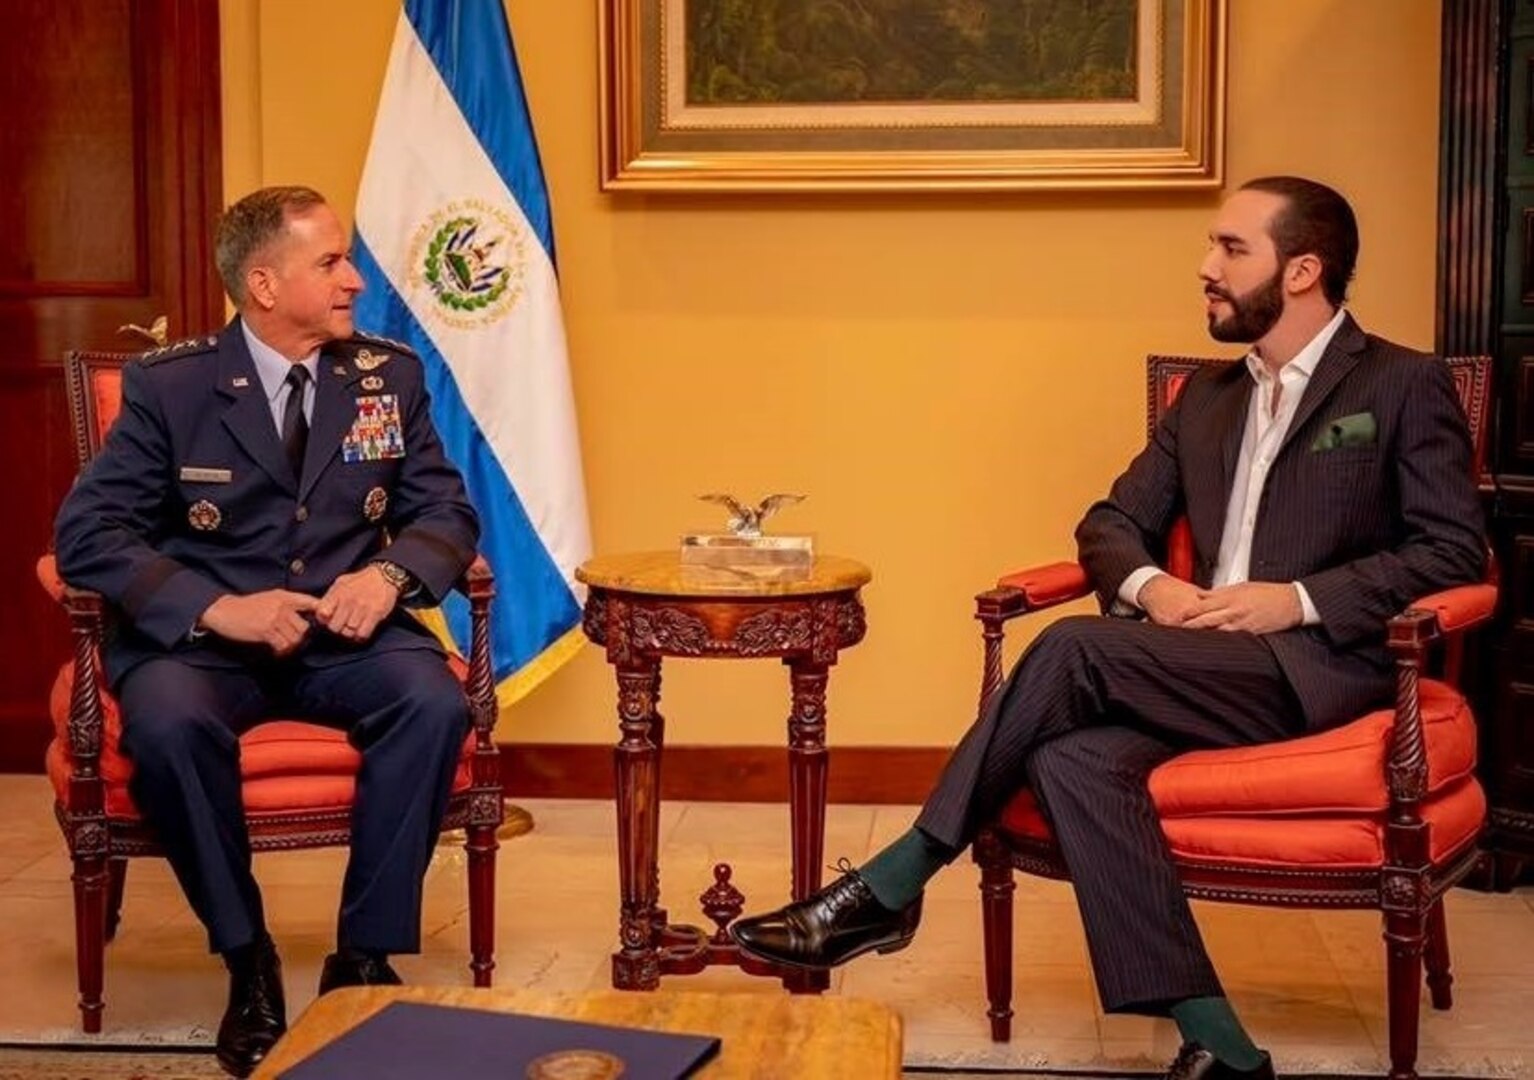 Air Force Chief of Staff Gen. David L. Goldfein meets with El Salvador’s newly elected President Nayib Bukele. The meeting came as part of Goldfein’s participation during a three-day conference in San Salvador, El Salvador that brought together air chiefs from 21 countries in the Western Hemisphere to discuss a range of regional issues and to strengthen partnerships.